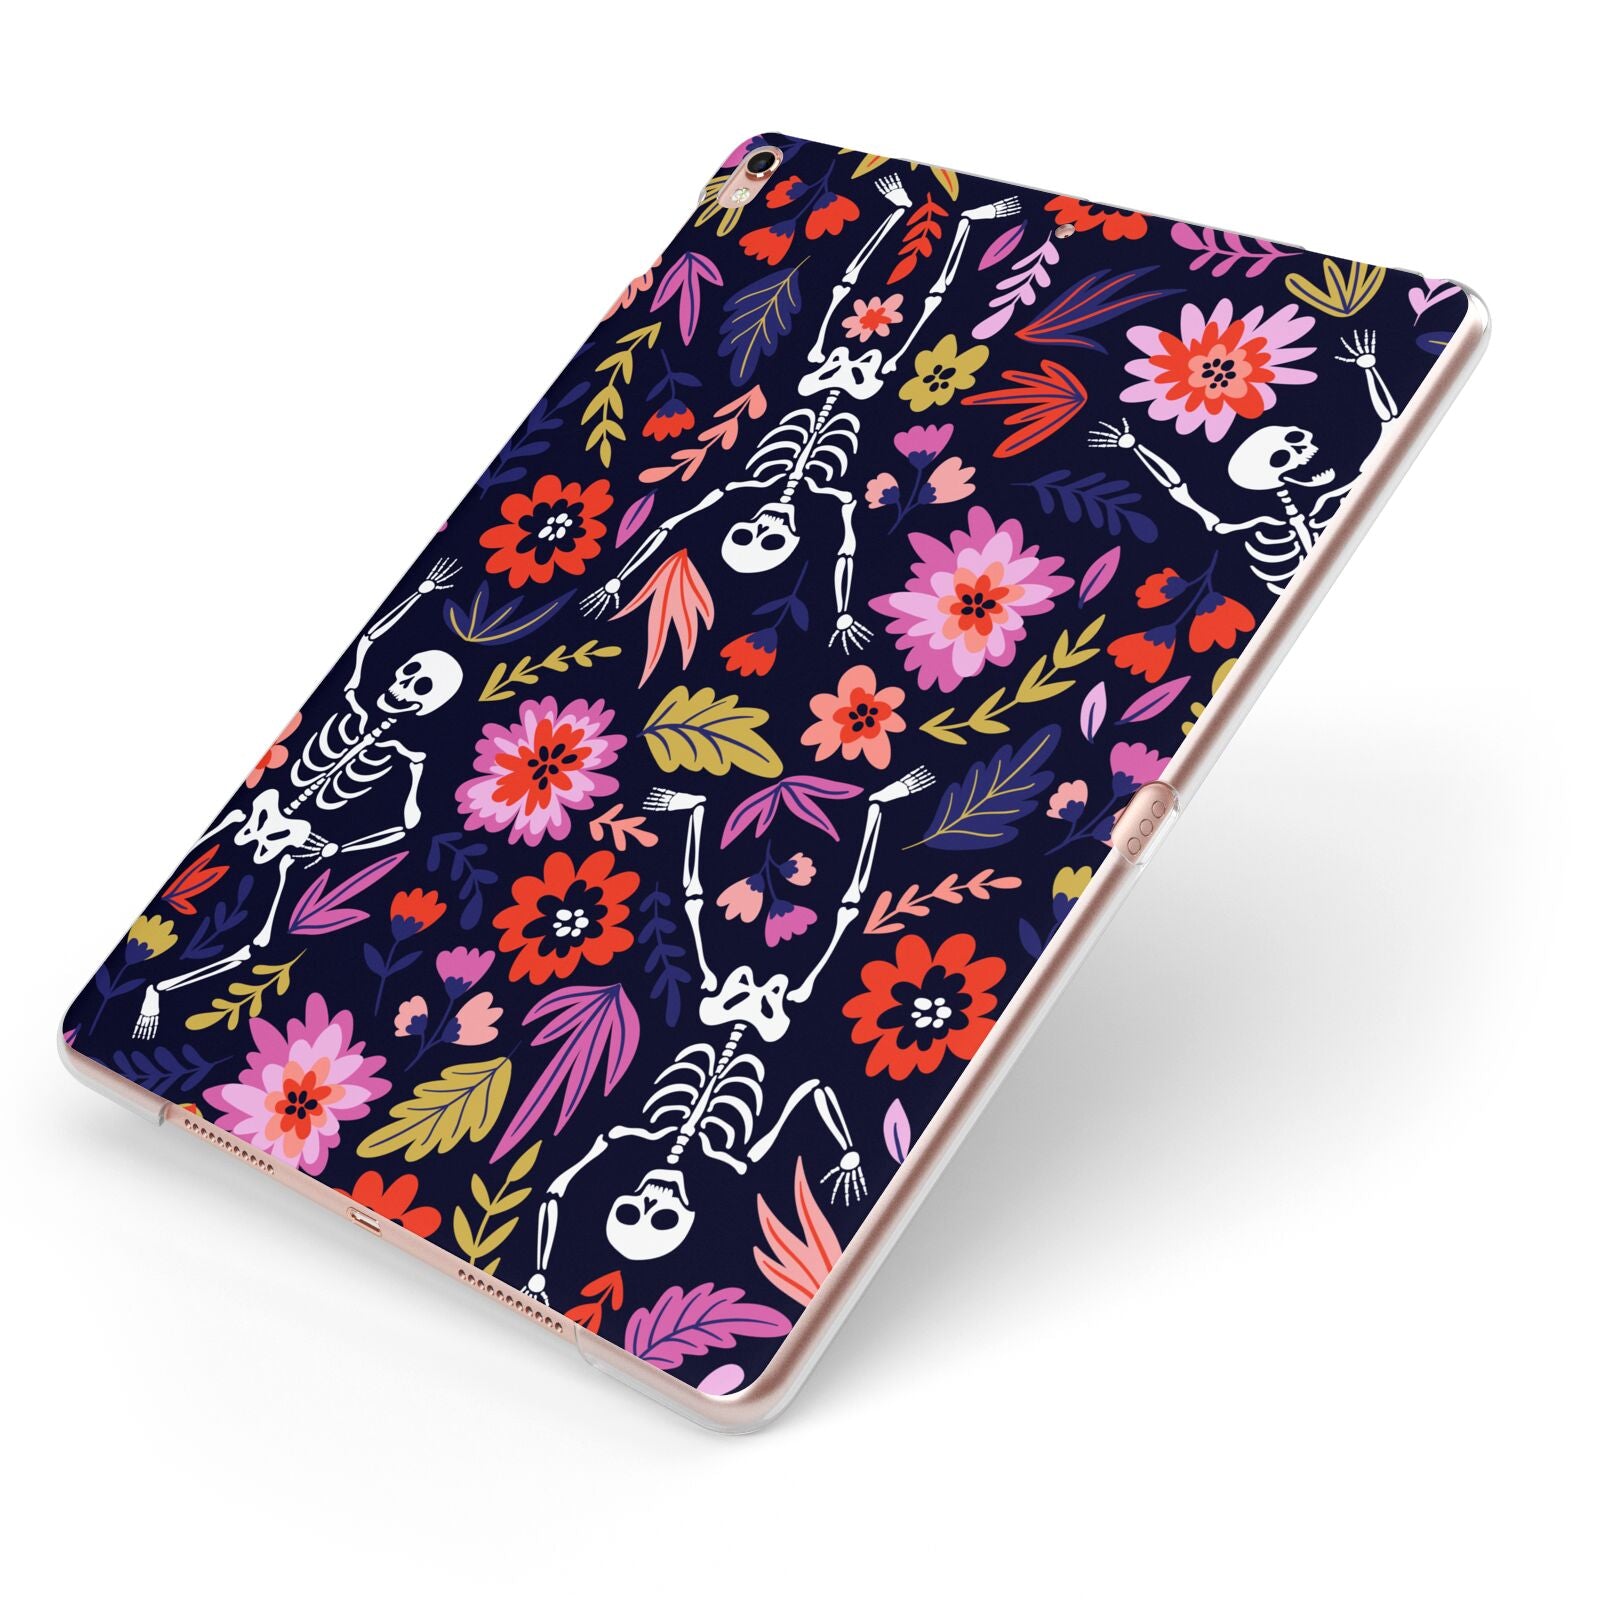 Floral Skeleton Apple iPad Case on Rose Gold iPad Side View